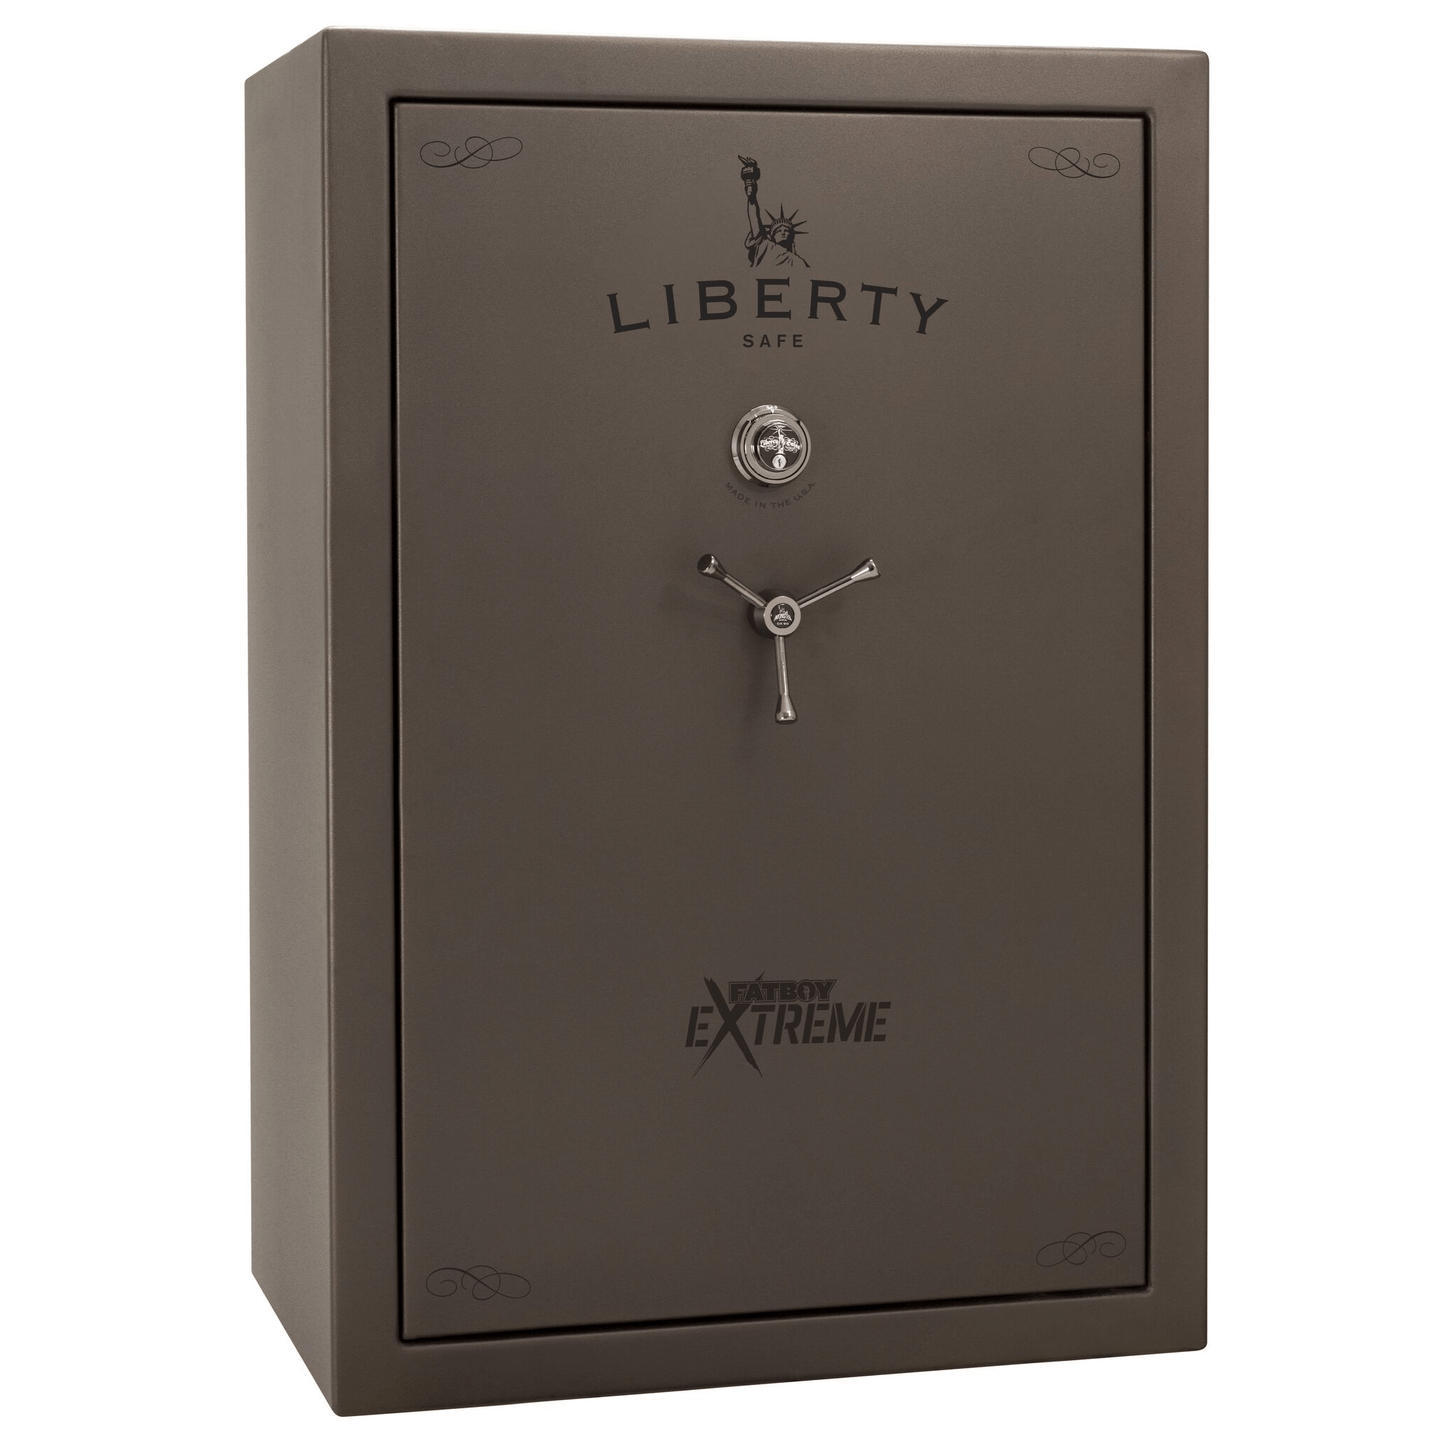 Fatboy Series | 64XT | Level 5 Security | 110 Minute Fire Protection | Dimensions: 60.5"(H) x 42"(W) x 27.5"(D) | Up to 60 Long Guns | Bronze Textured | Mechanical Lock